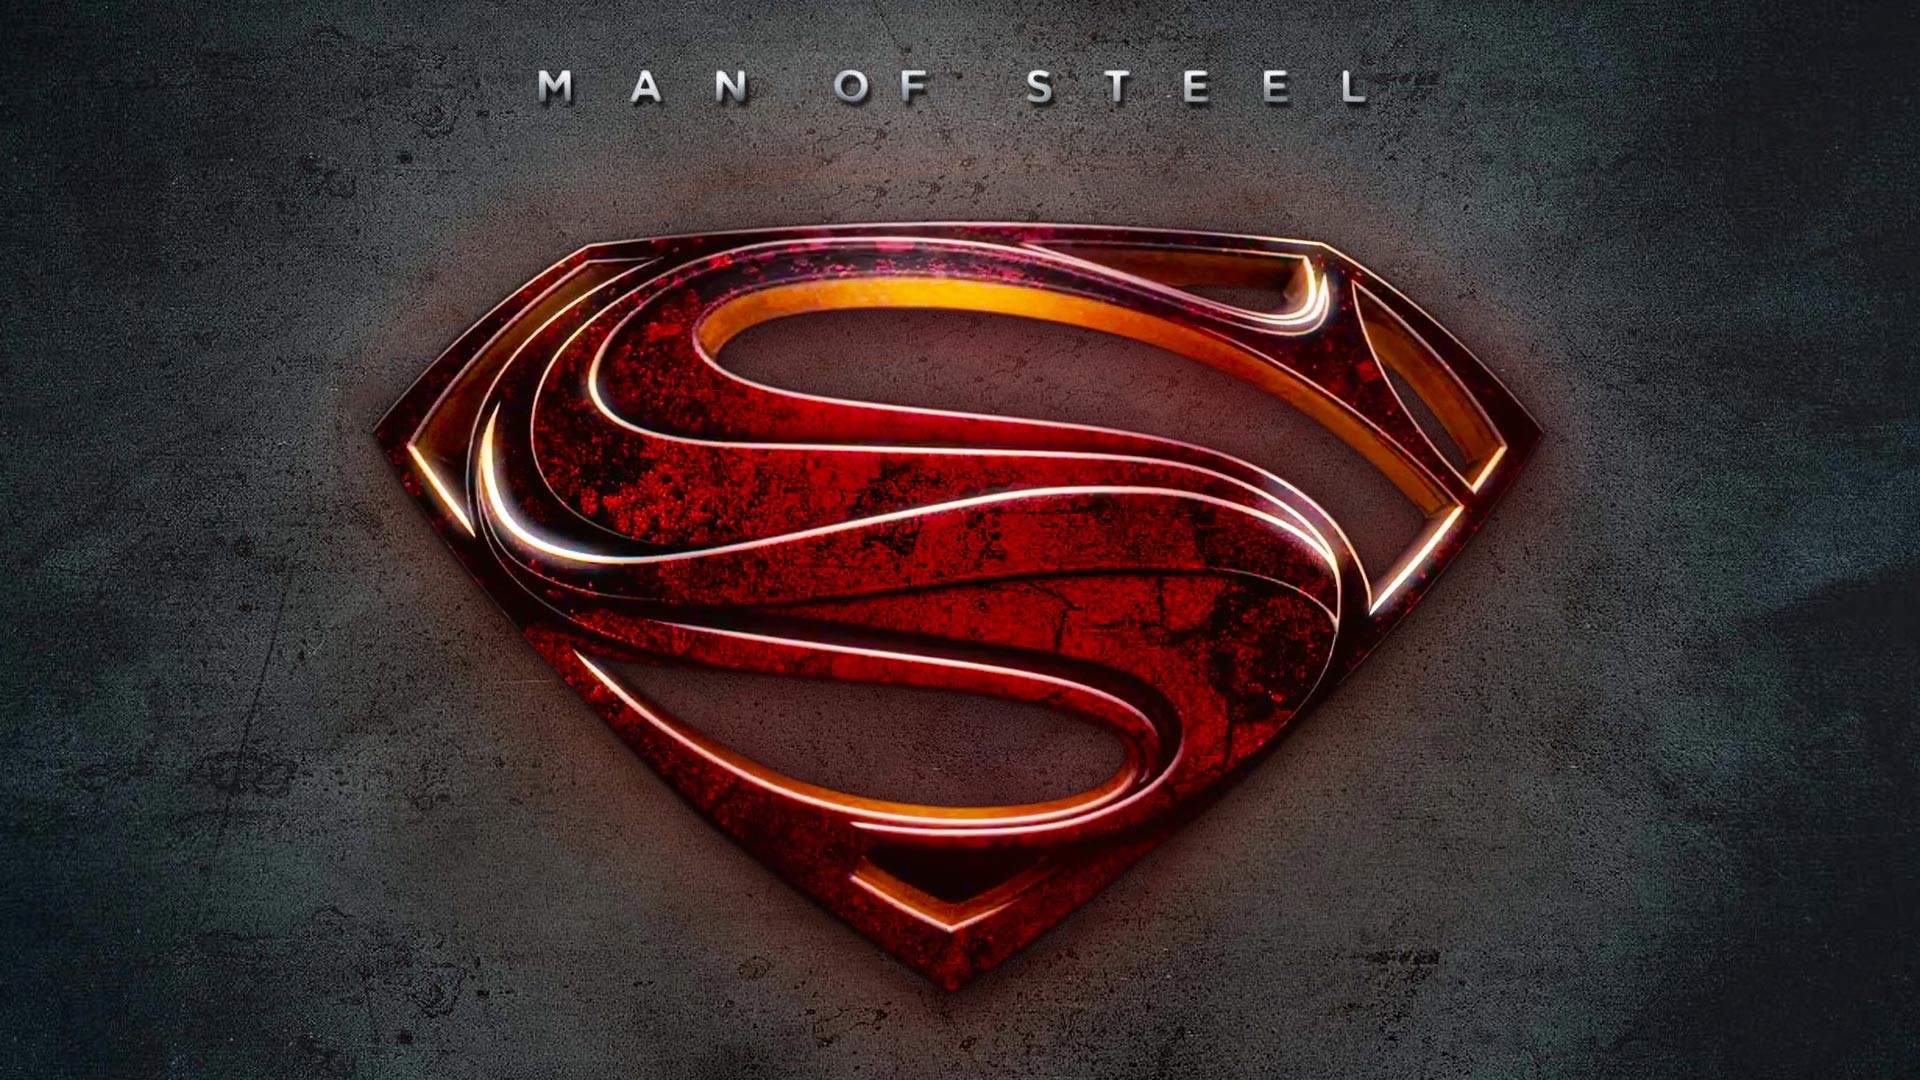 1920x1080 92 Man Of Steel HD Wallpapers | Backgrounds - Wallpaper Abyss Superman ...